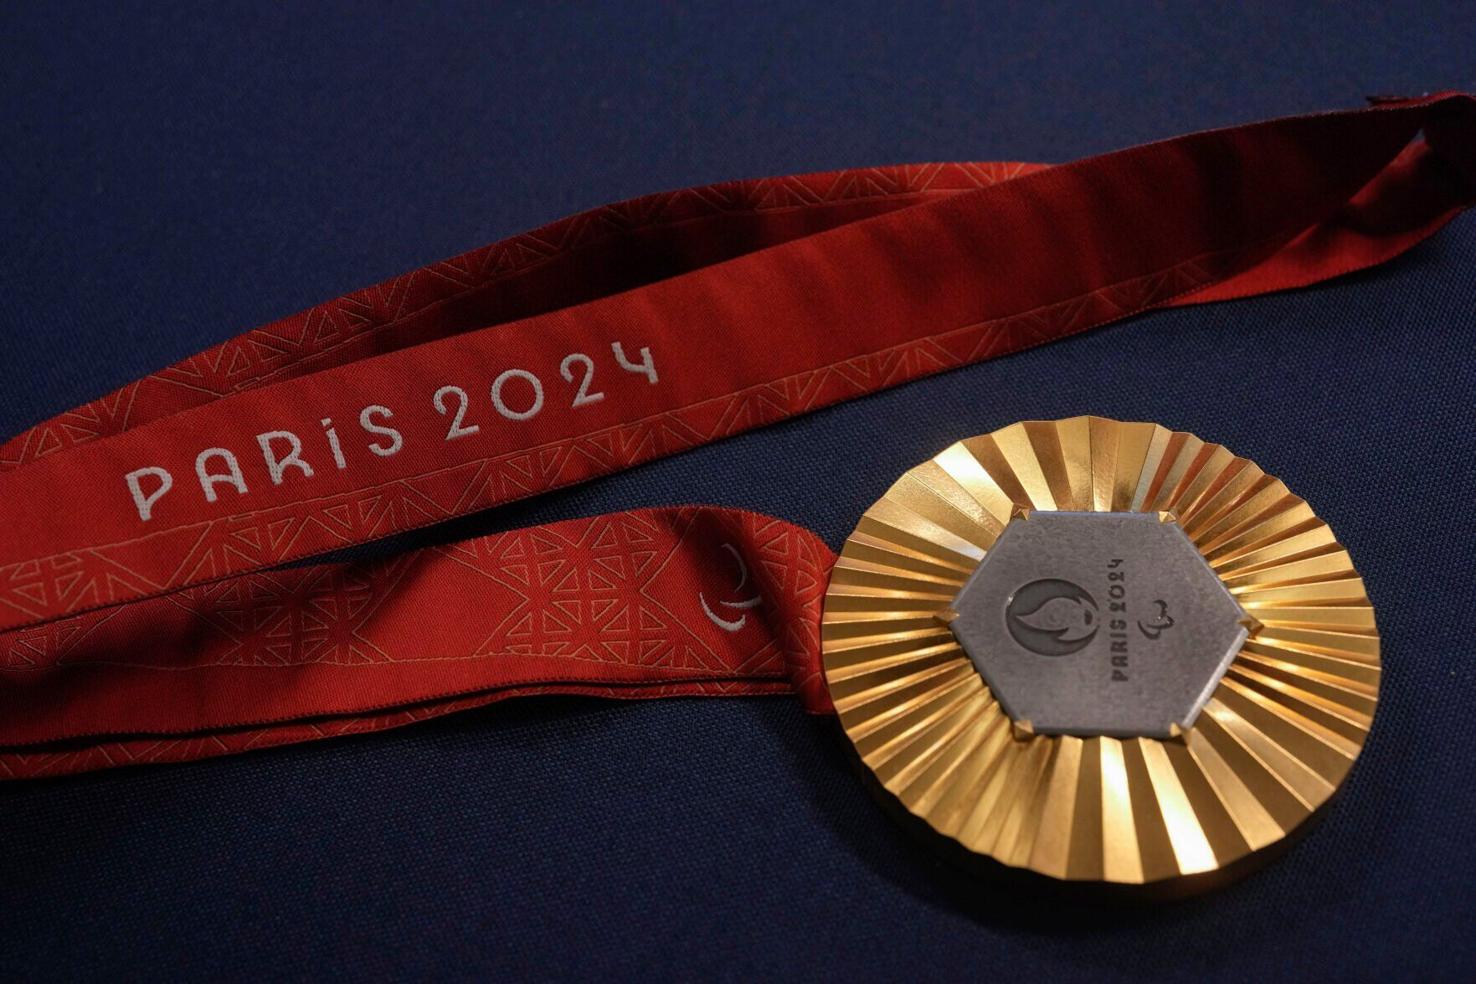 Photos Medals for the 2024 Paris Olympics unveiled